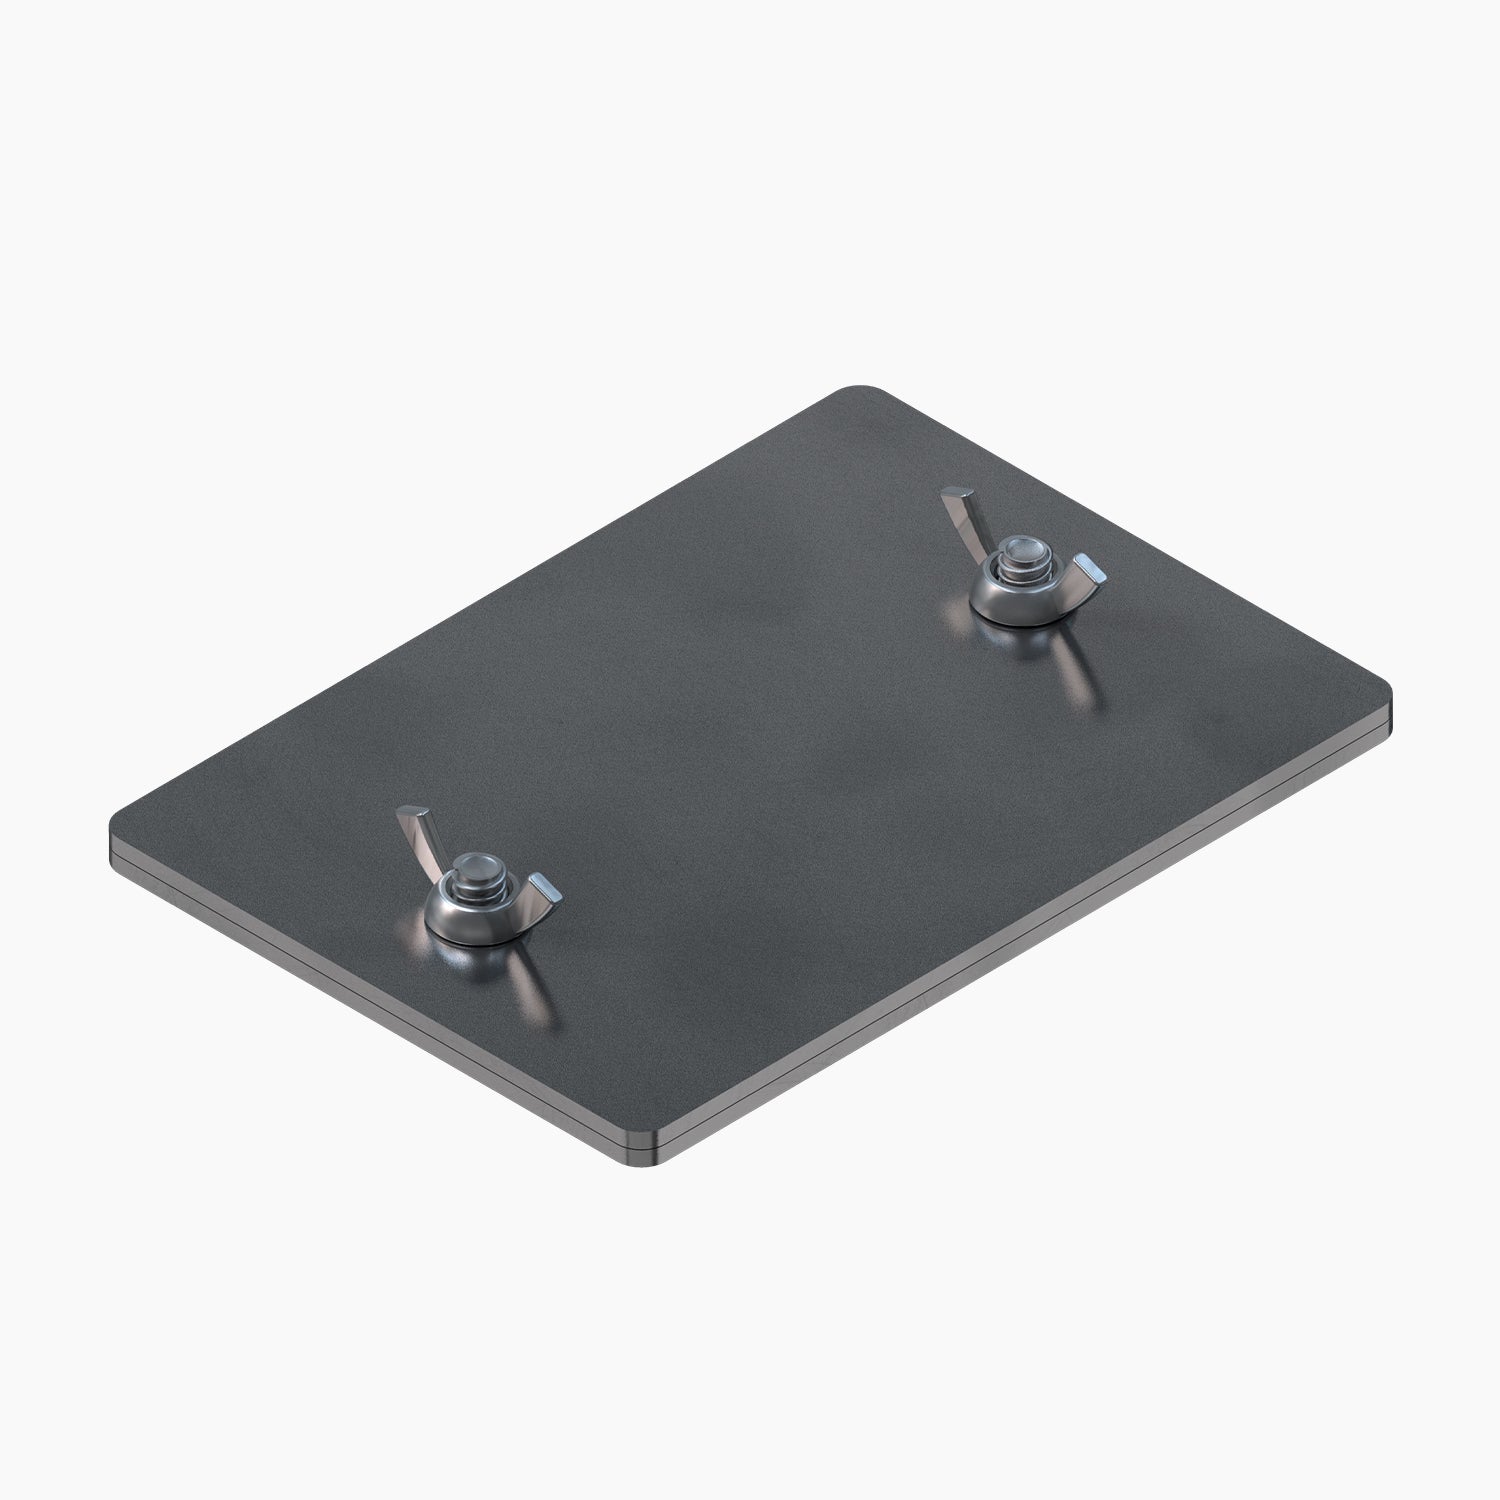 Two stainless steel crypto backup plates by CryptoNumeris secured together with screws and wingnuts